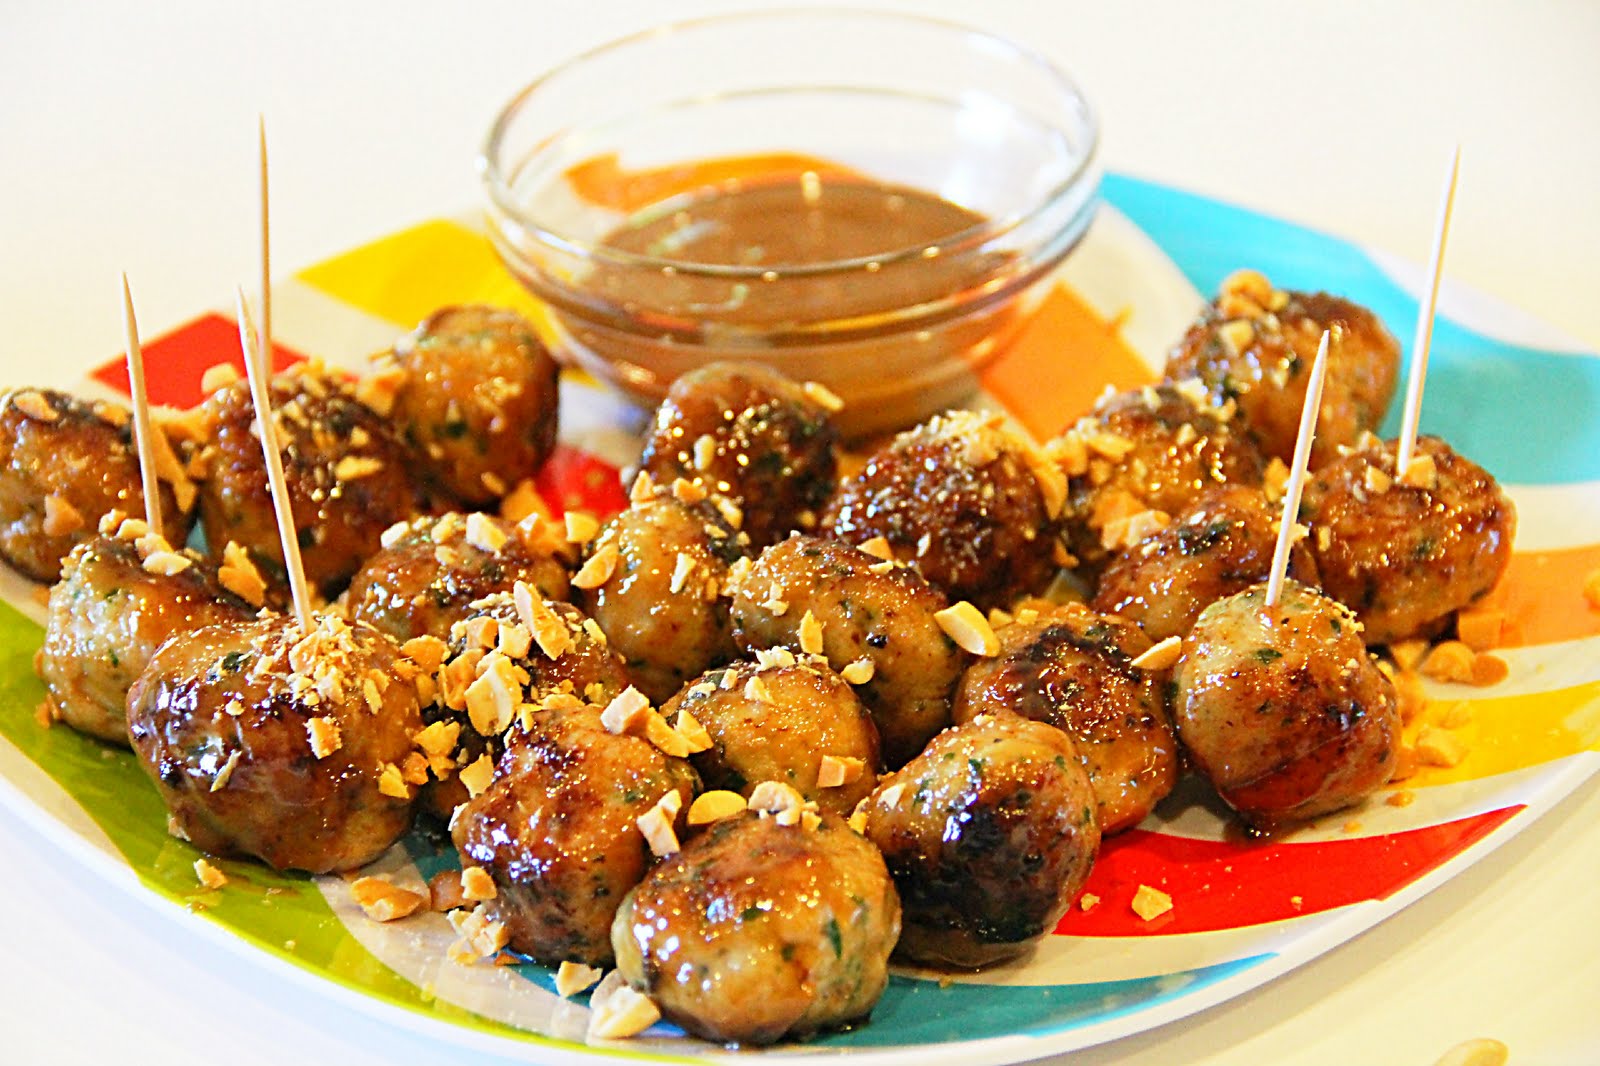 sauce Chicken make  Meatballs  dipping  Desserts butter  Printable Peanut with Recipes: peanut to Sauce how